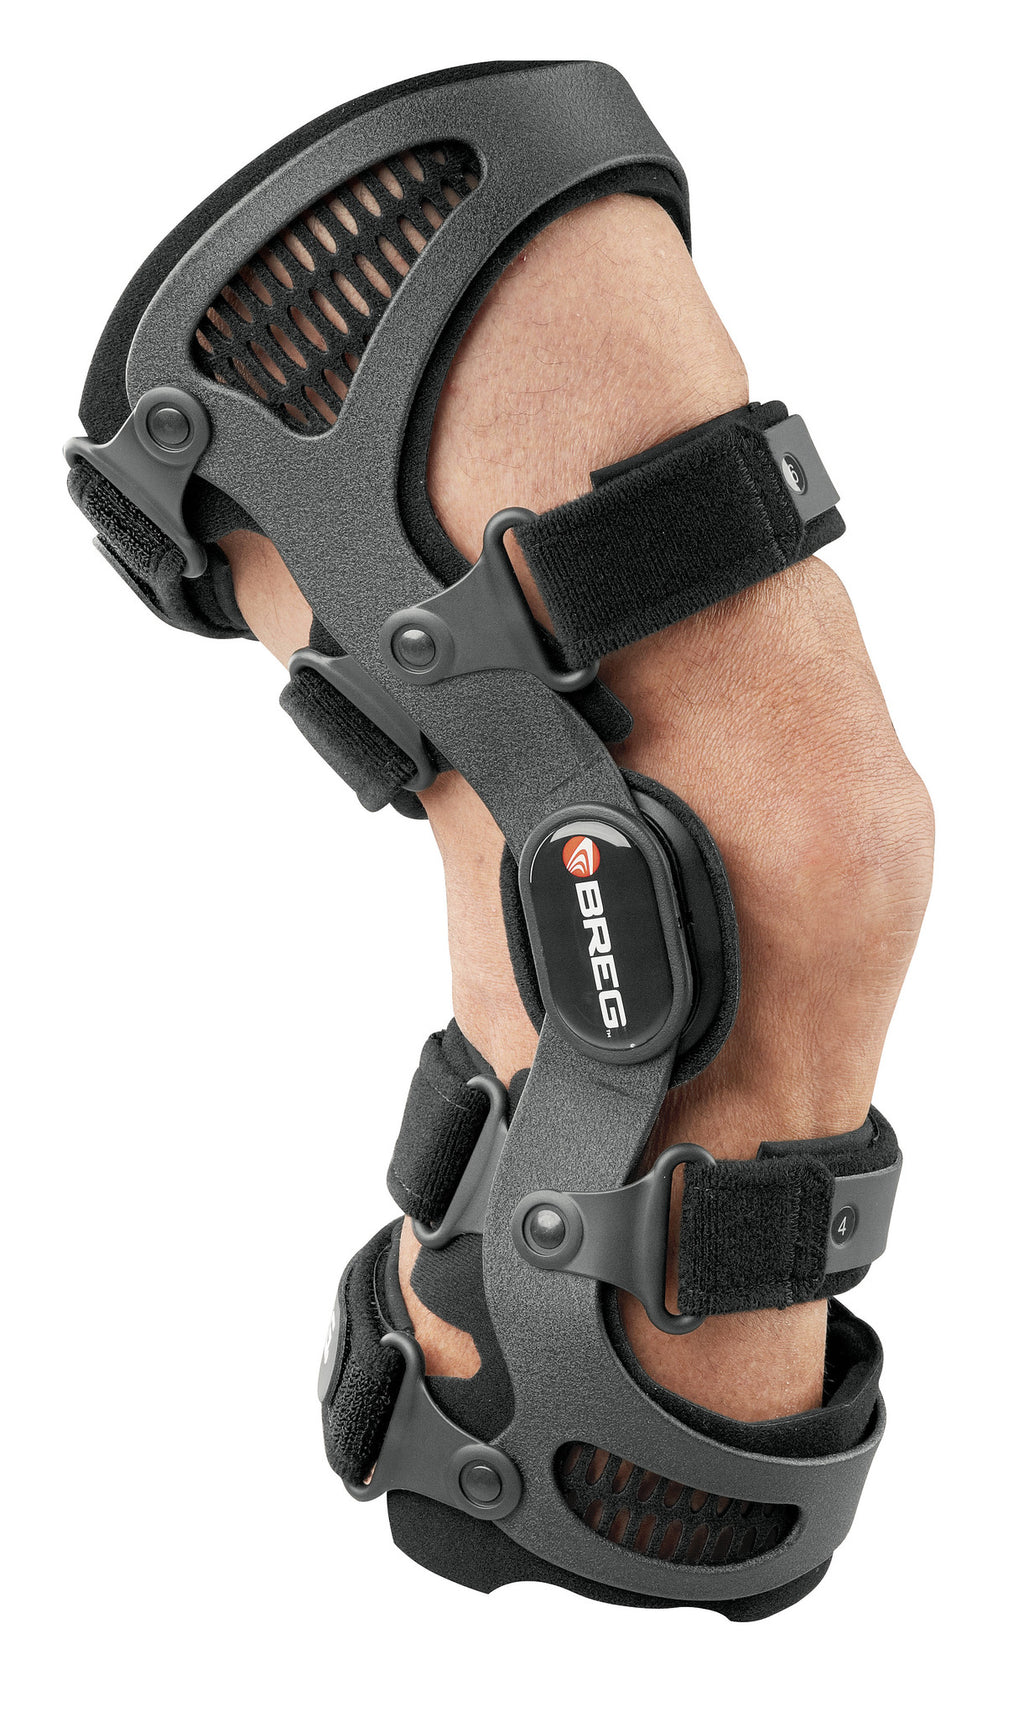 T Scope Premier Knee Brace, Cold Therapy Canada, Cold Therapy Canada